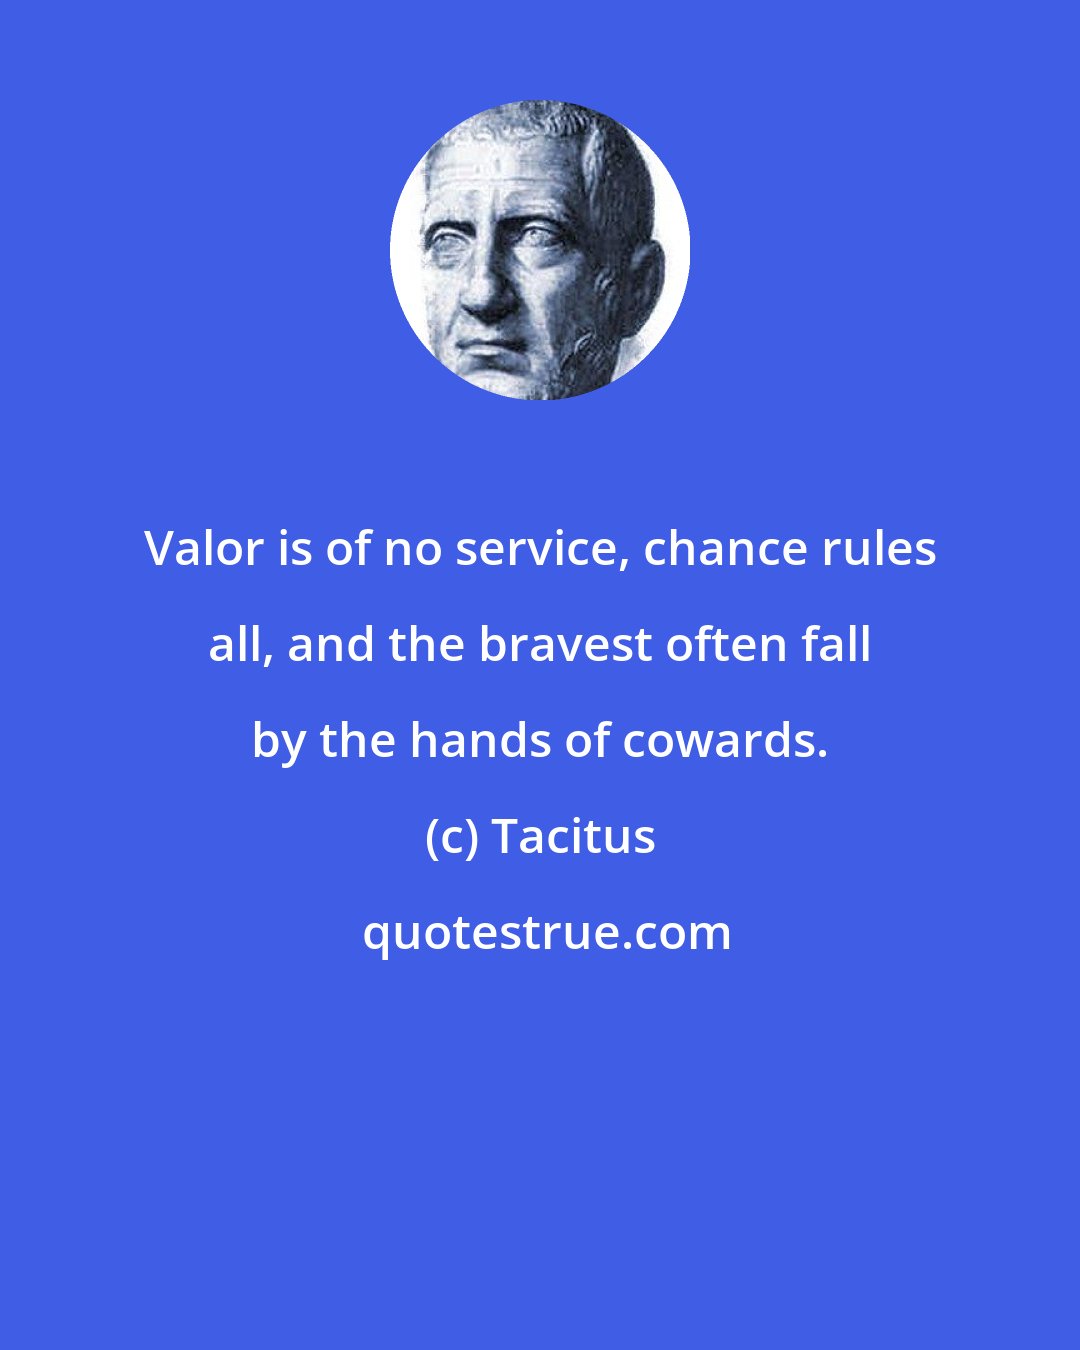 Tacitus: Valor is of no service, chance rules all, and the bravest often fall by the hands of cowards.